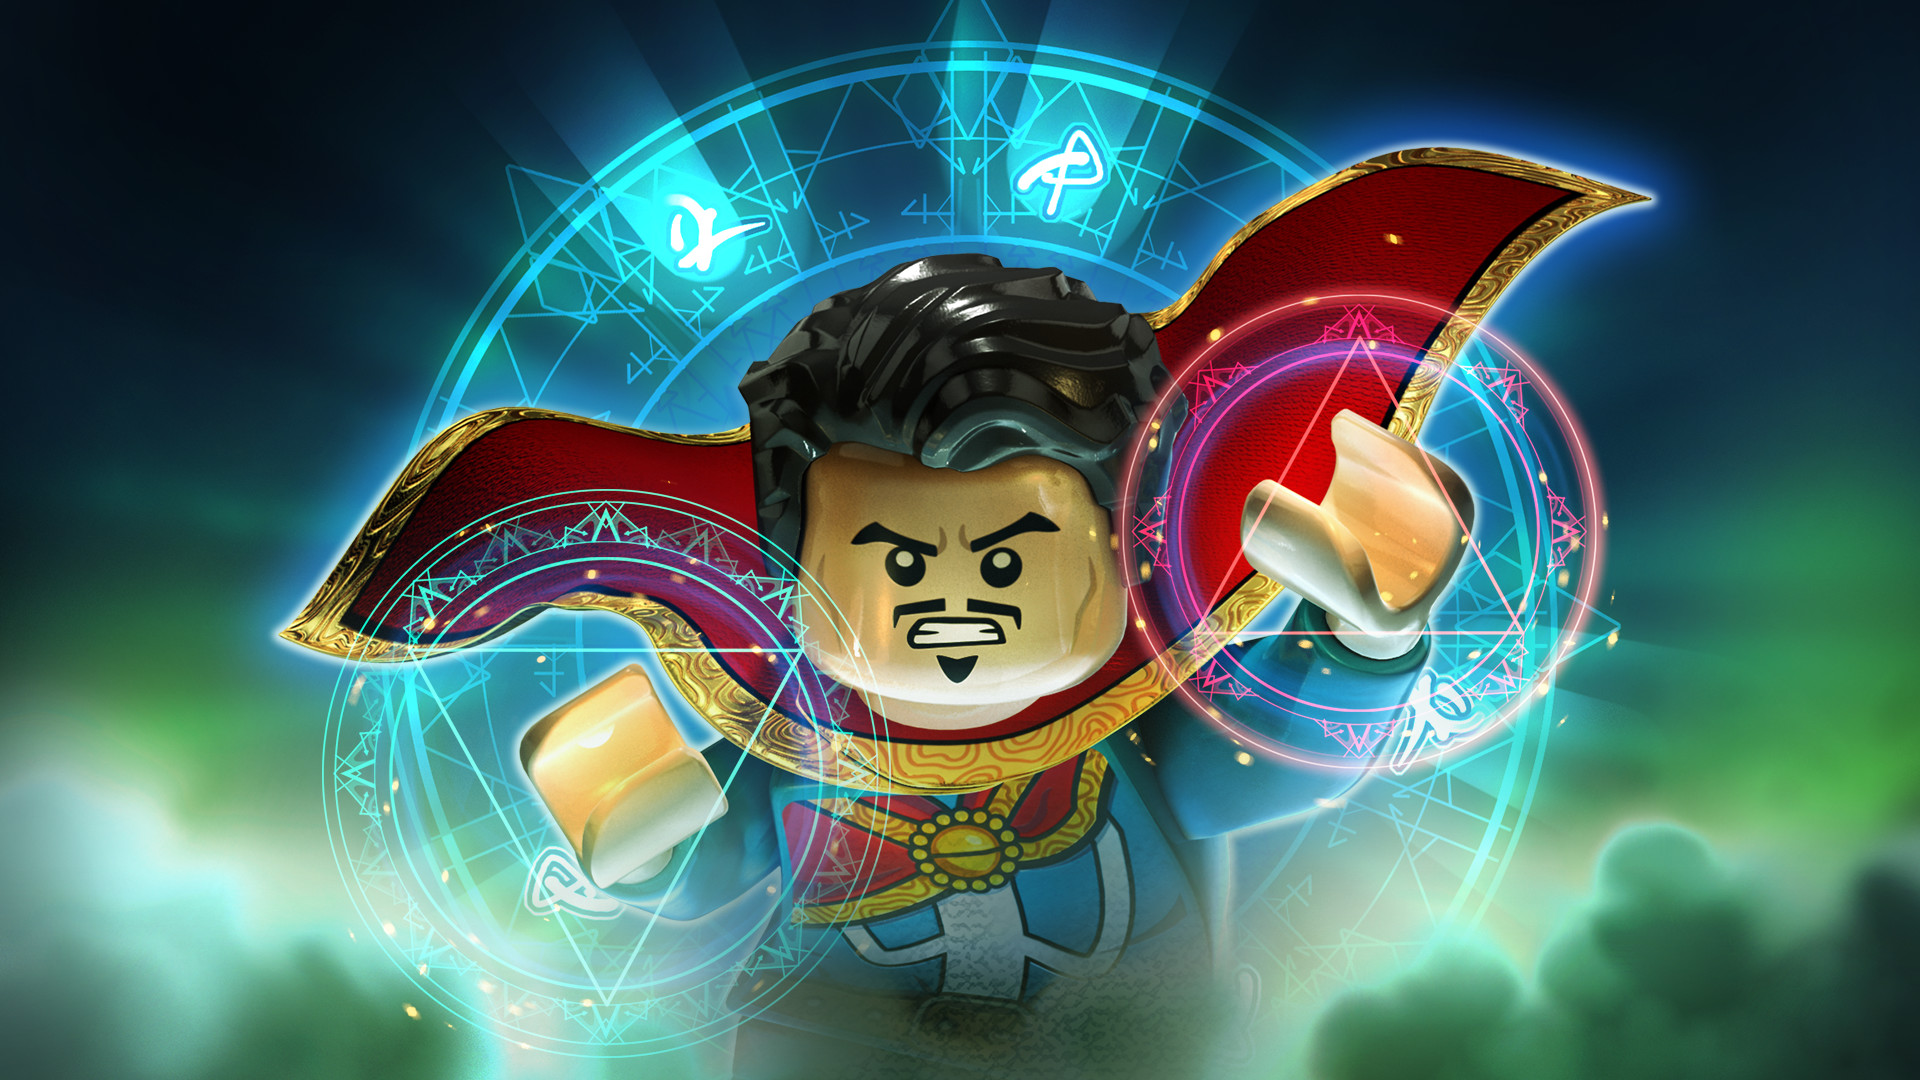 LEGO® MARVEL's Avengers DLC - All-New, All-Different Doctor Strange Pack Featured Screenshot #1